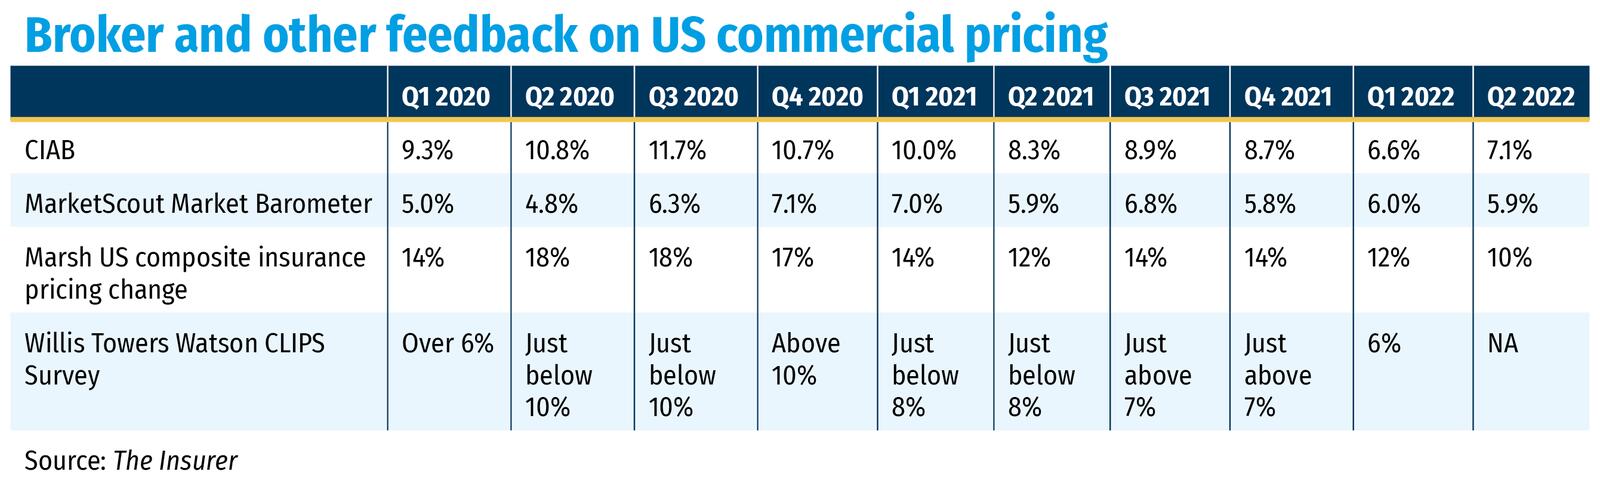 Broker and other feedback on US commercial pricing